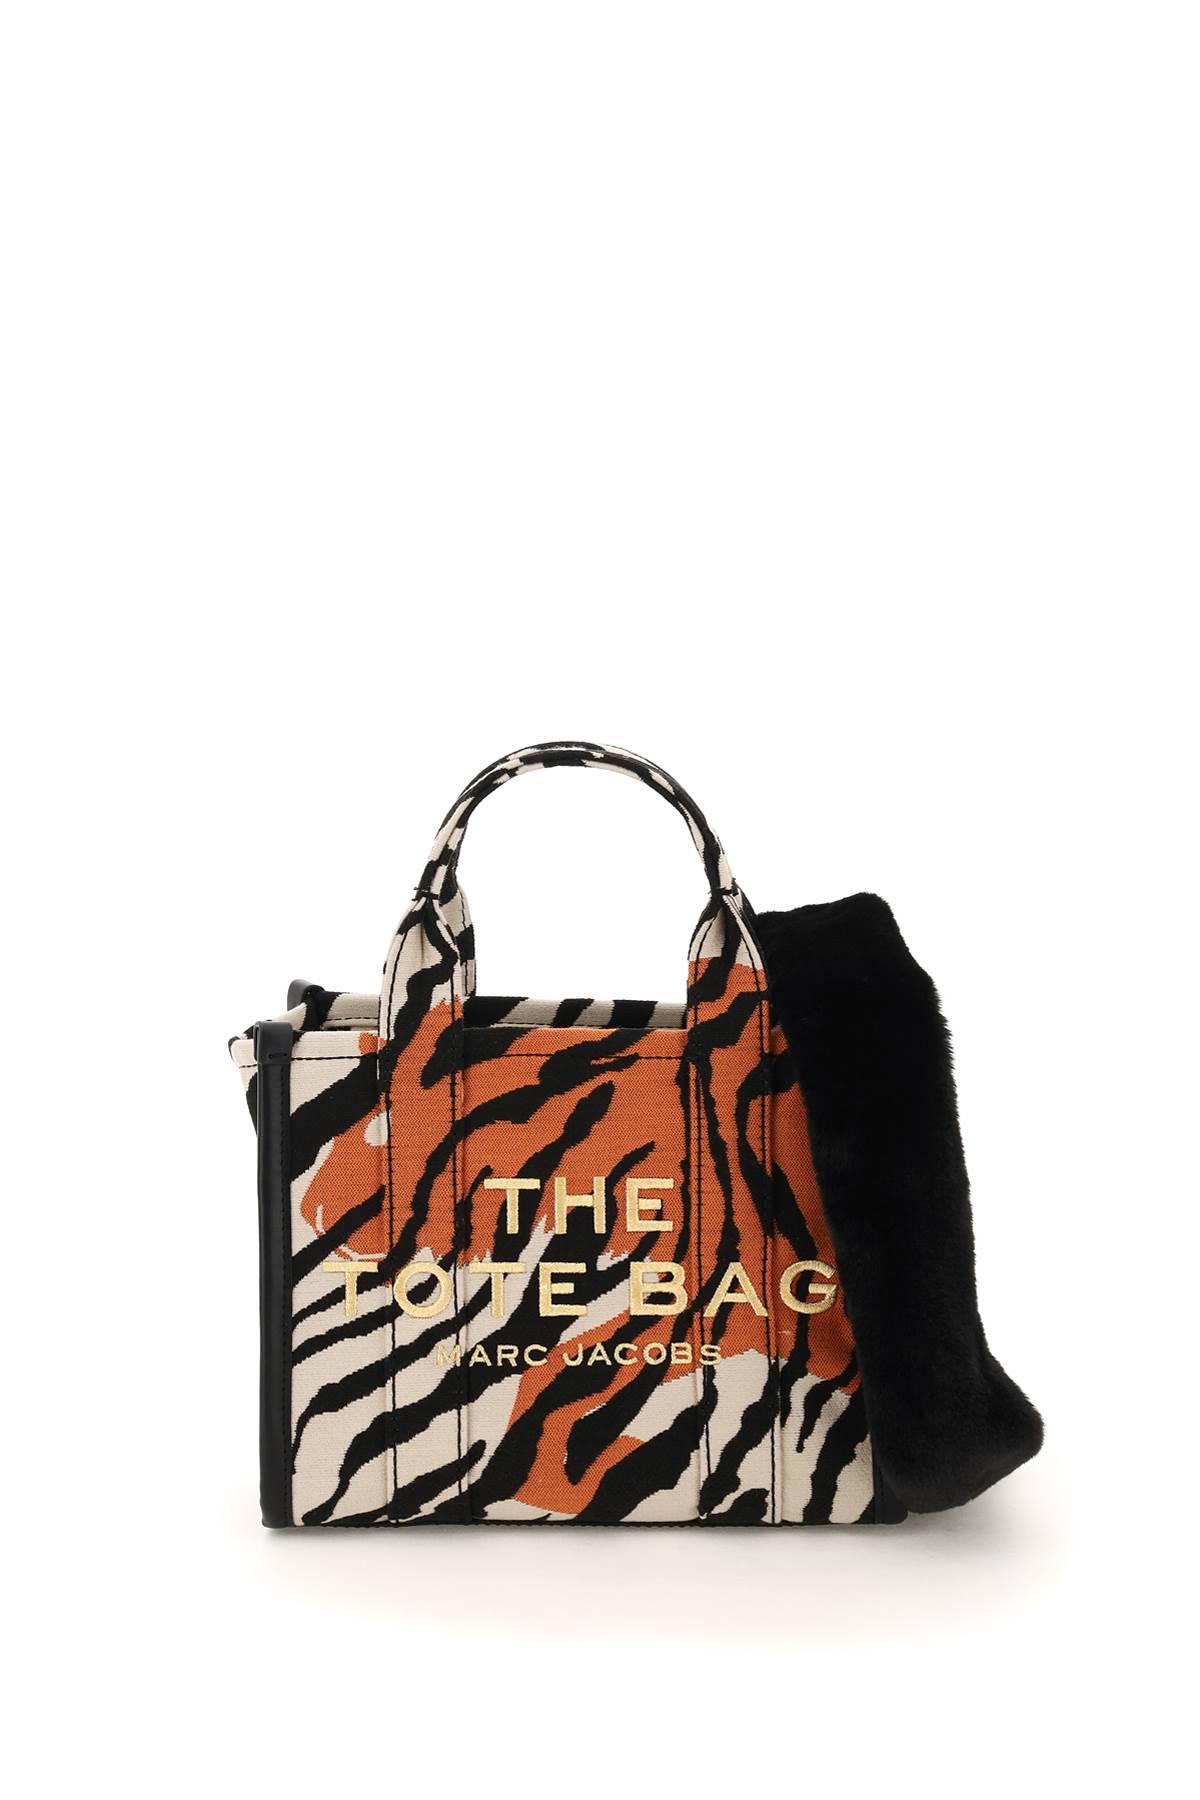 MARC JACOBS: The Tote Bag bag with tiger pattern - Orange